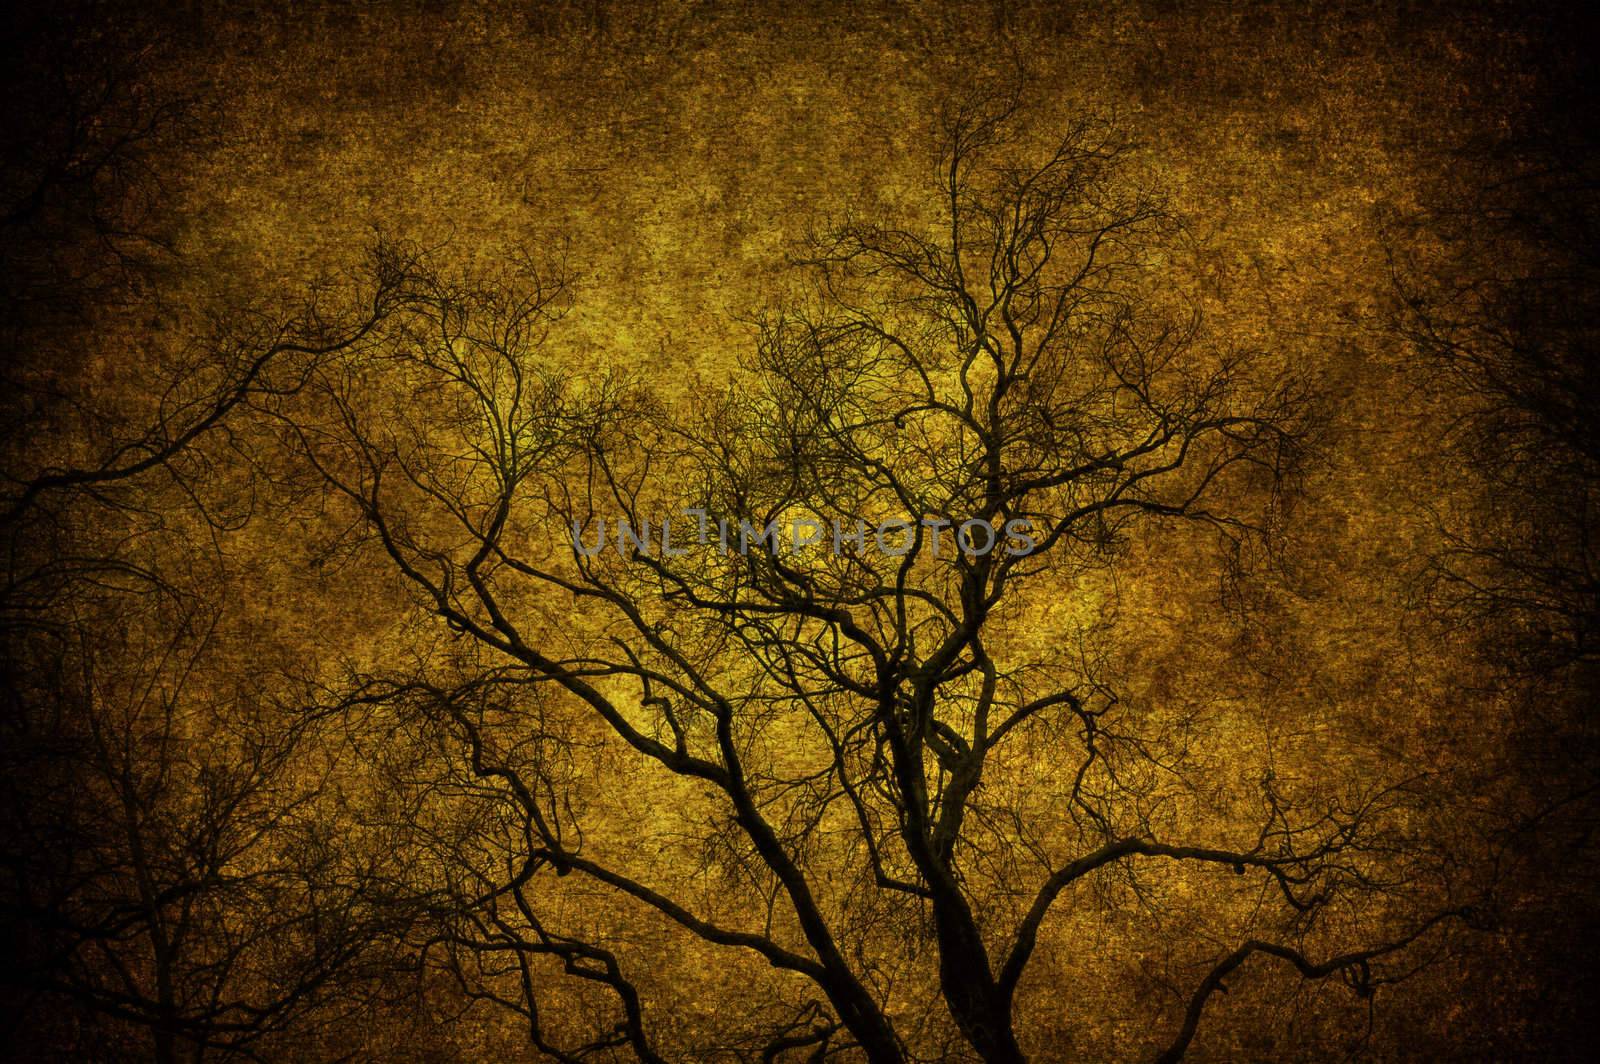 A grunge tree textured in the sky